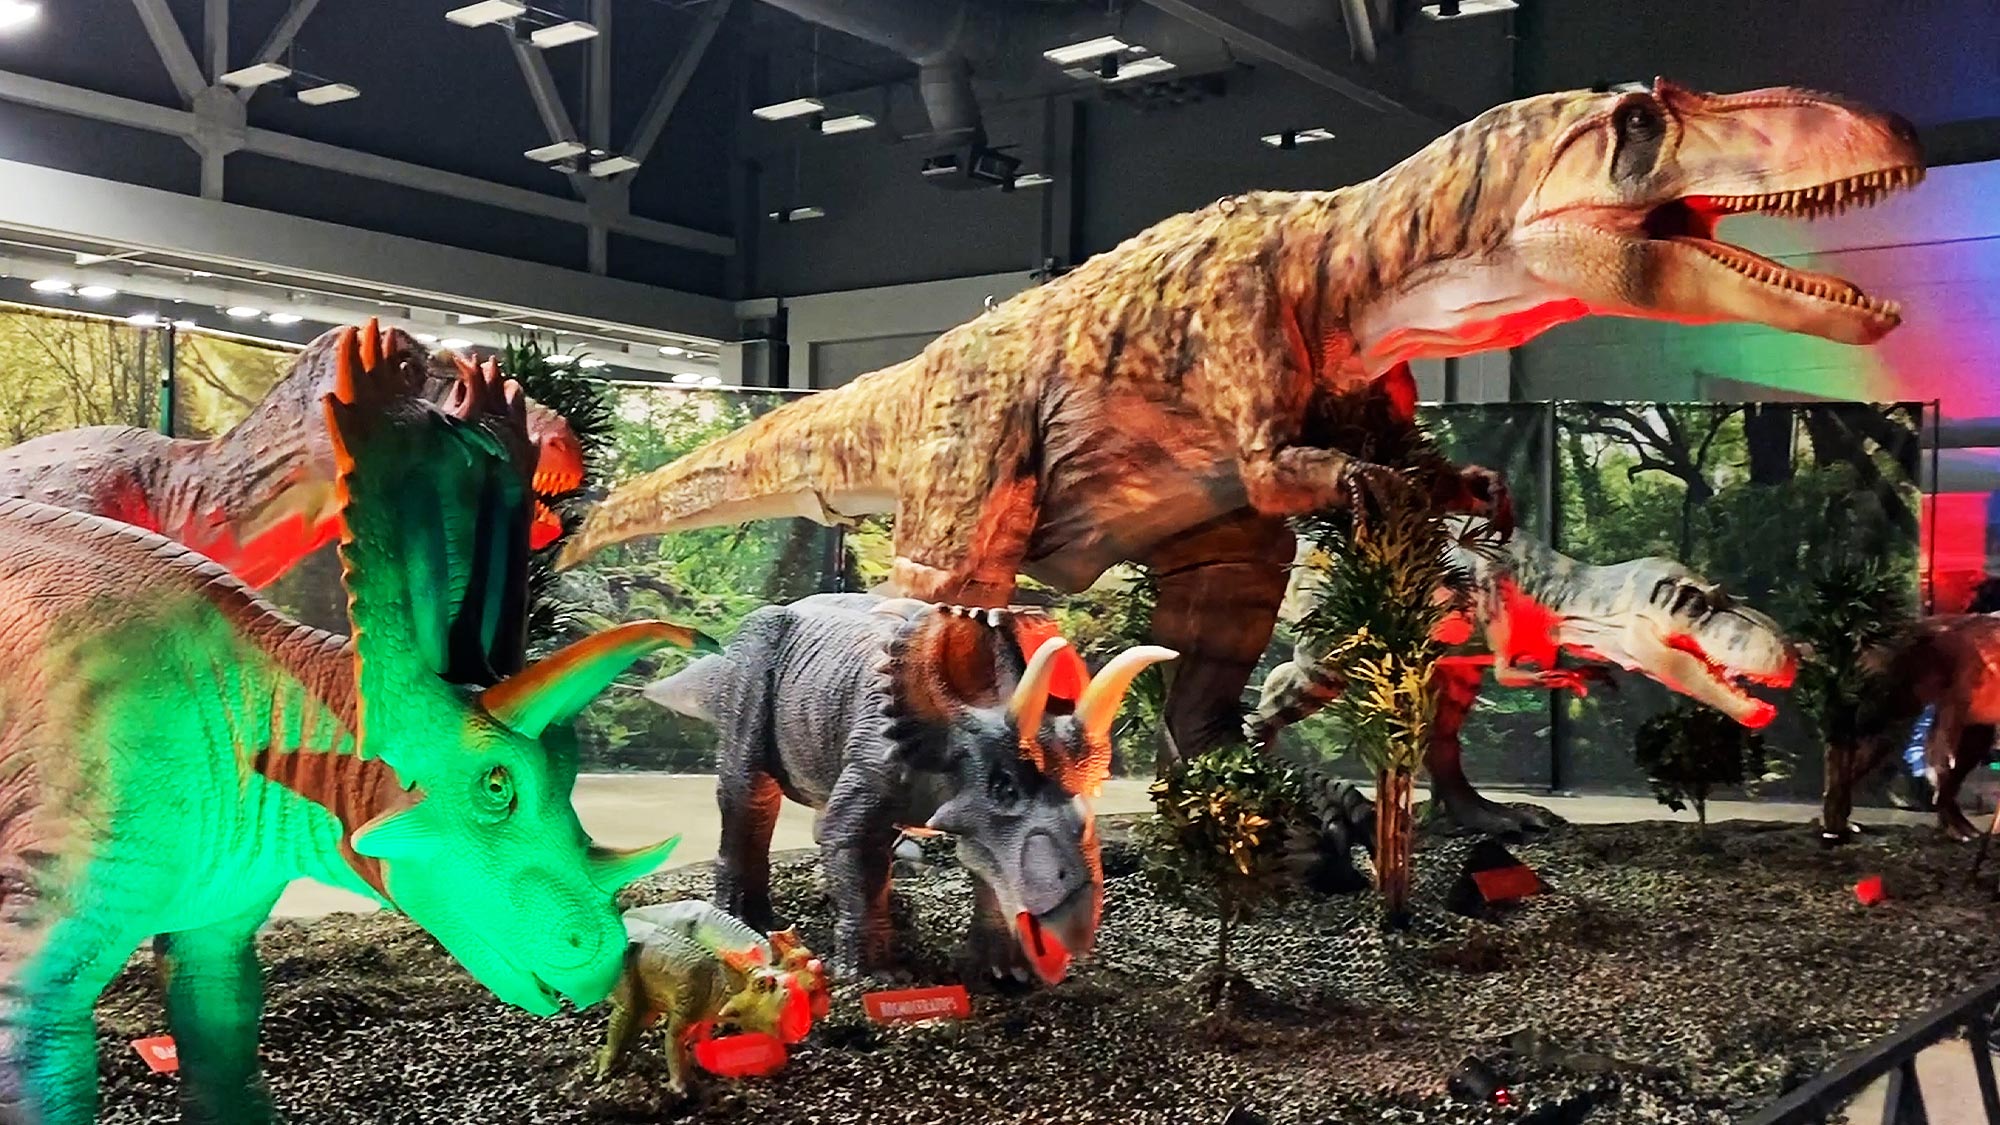 Jurassic Quest Migrates to Navy Pier, March 3-5